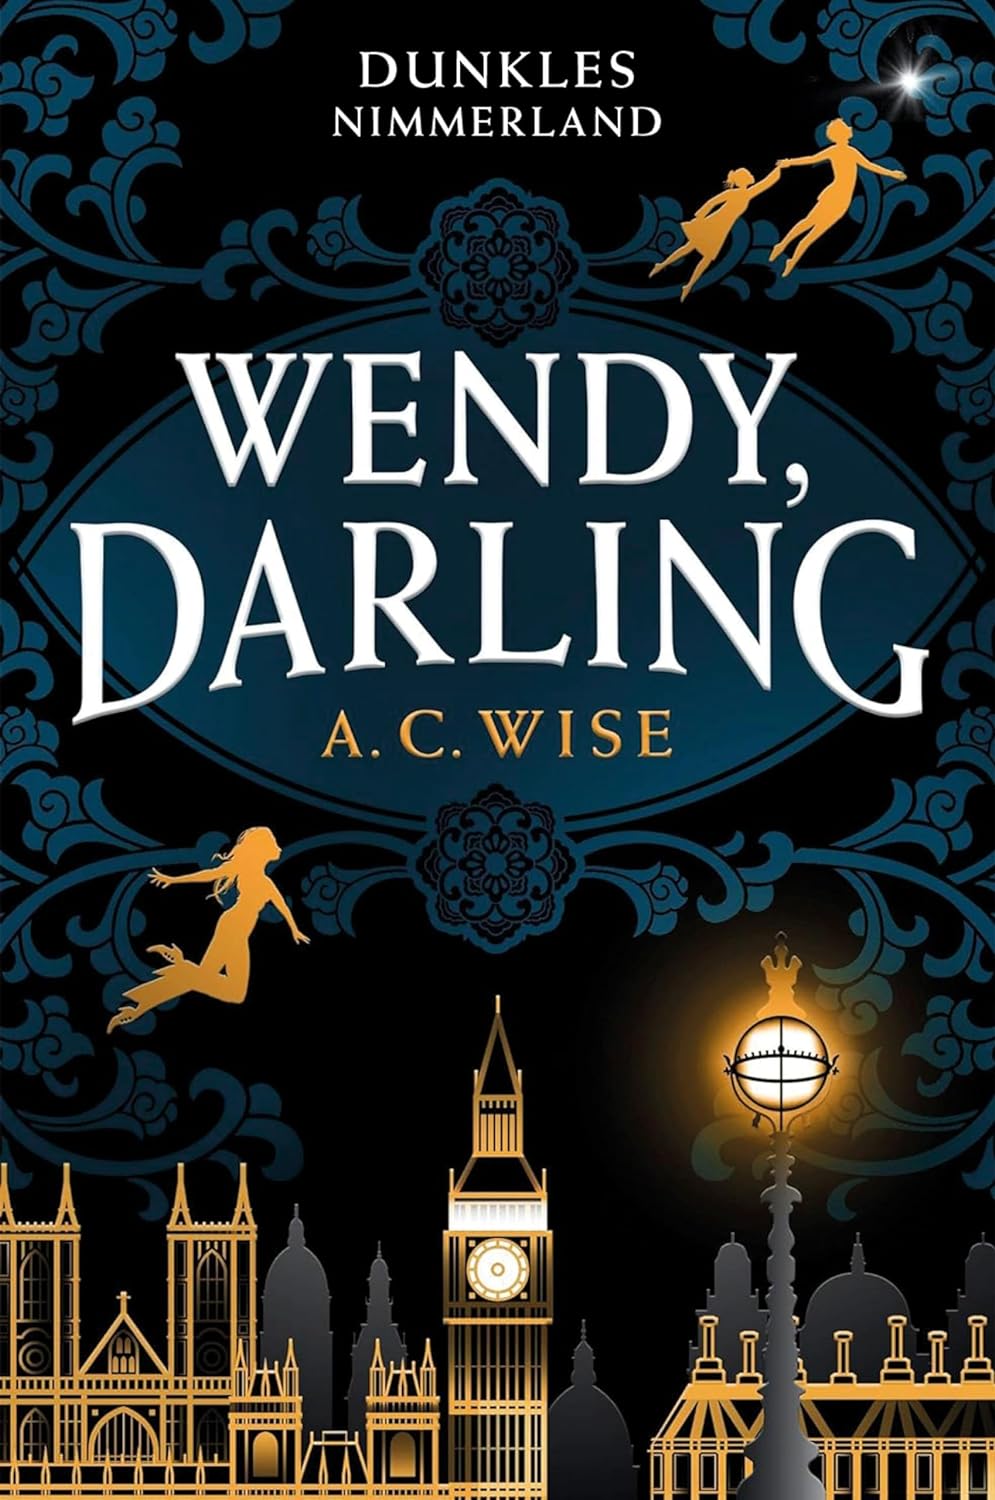 A. C. Wise - Wendy, Darling - Dunkles Nimmerland